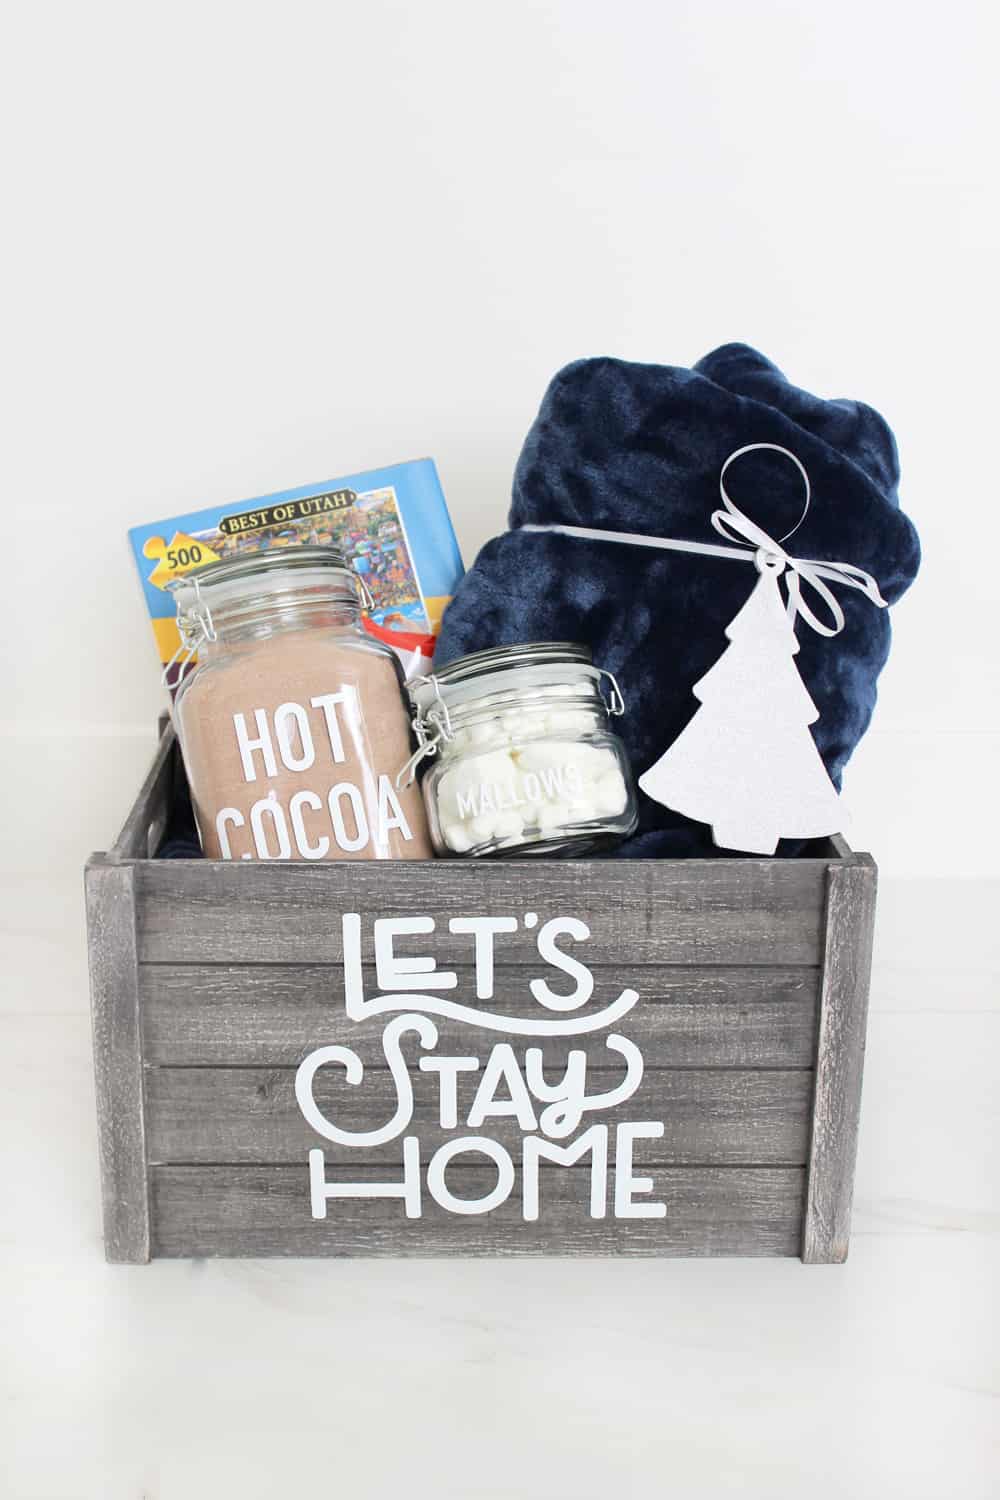 Loving this easy personalized "night in" gift basket idea! Easy to put together but can be used again and again! Perfect gift for close friends. 